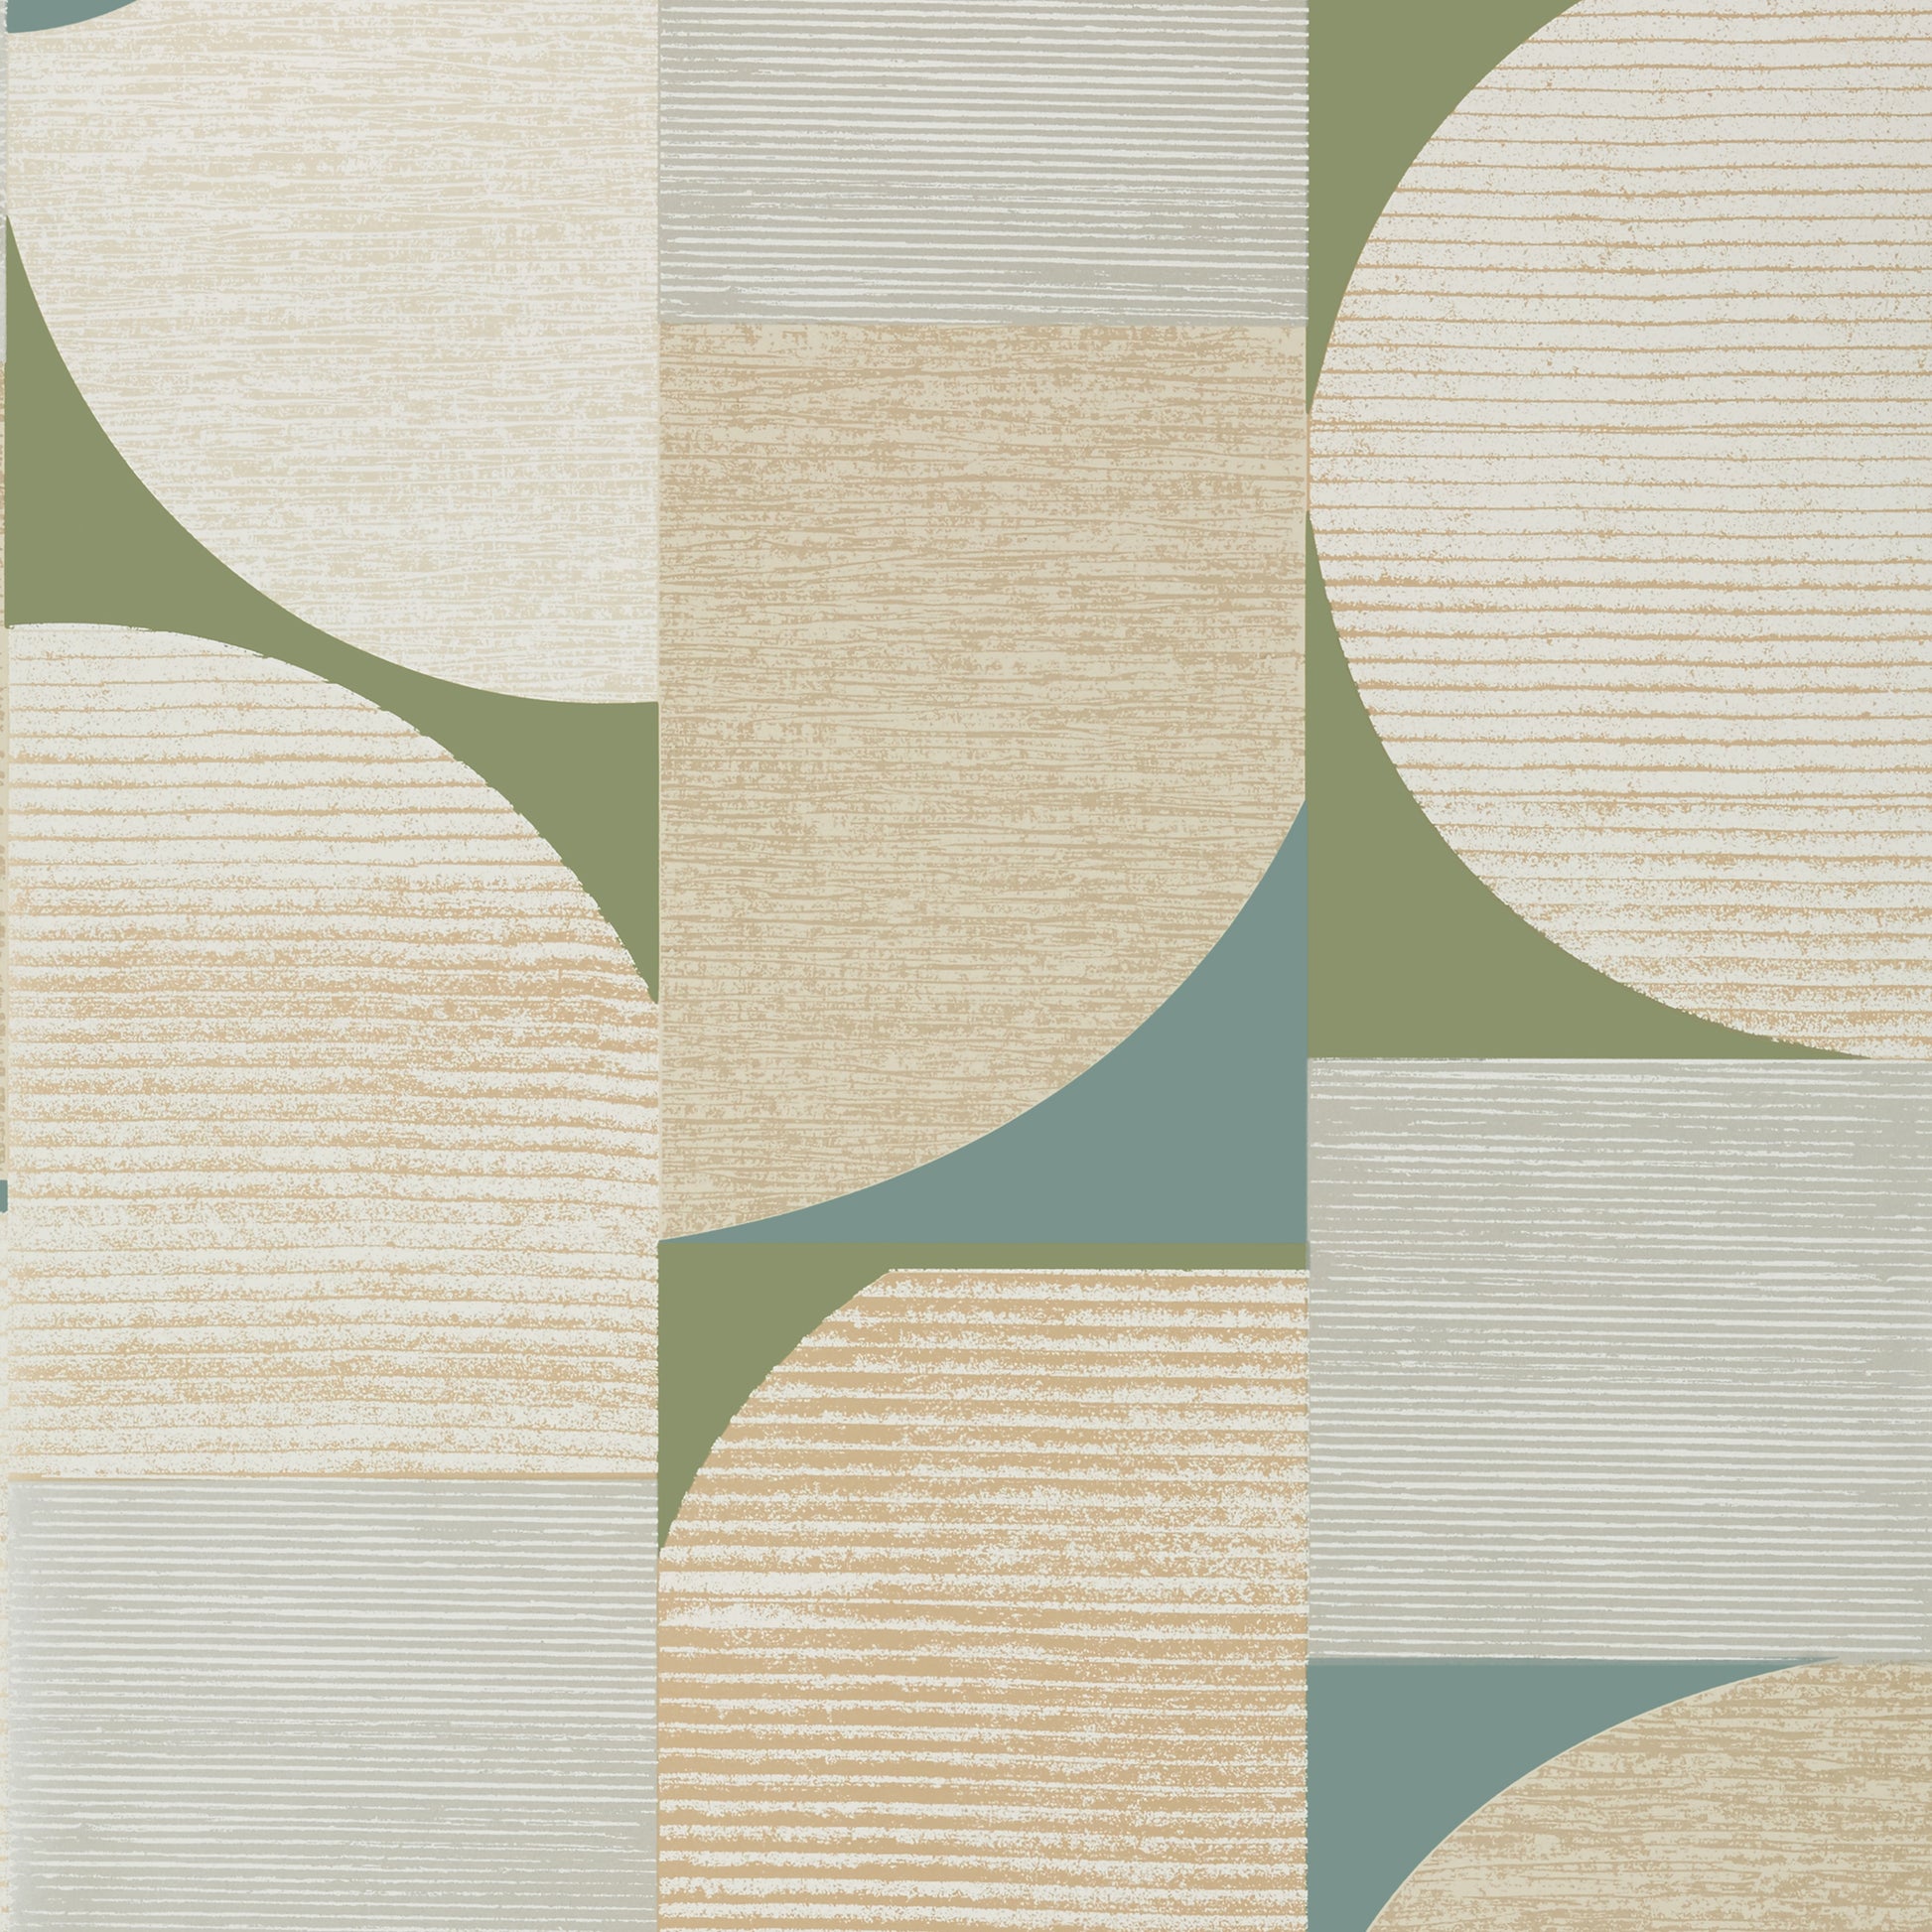 Purchase Thibaut Wallpaper Item T41026 pattern name Saturn color Metallic Gold and Moss. 